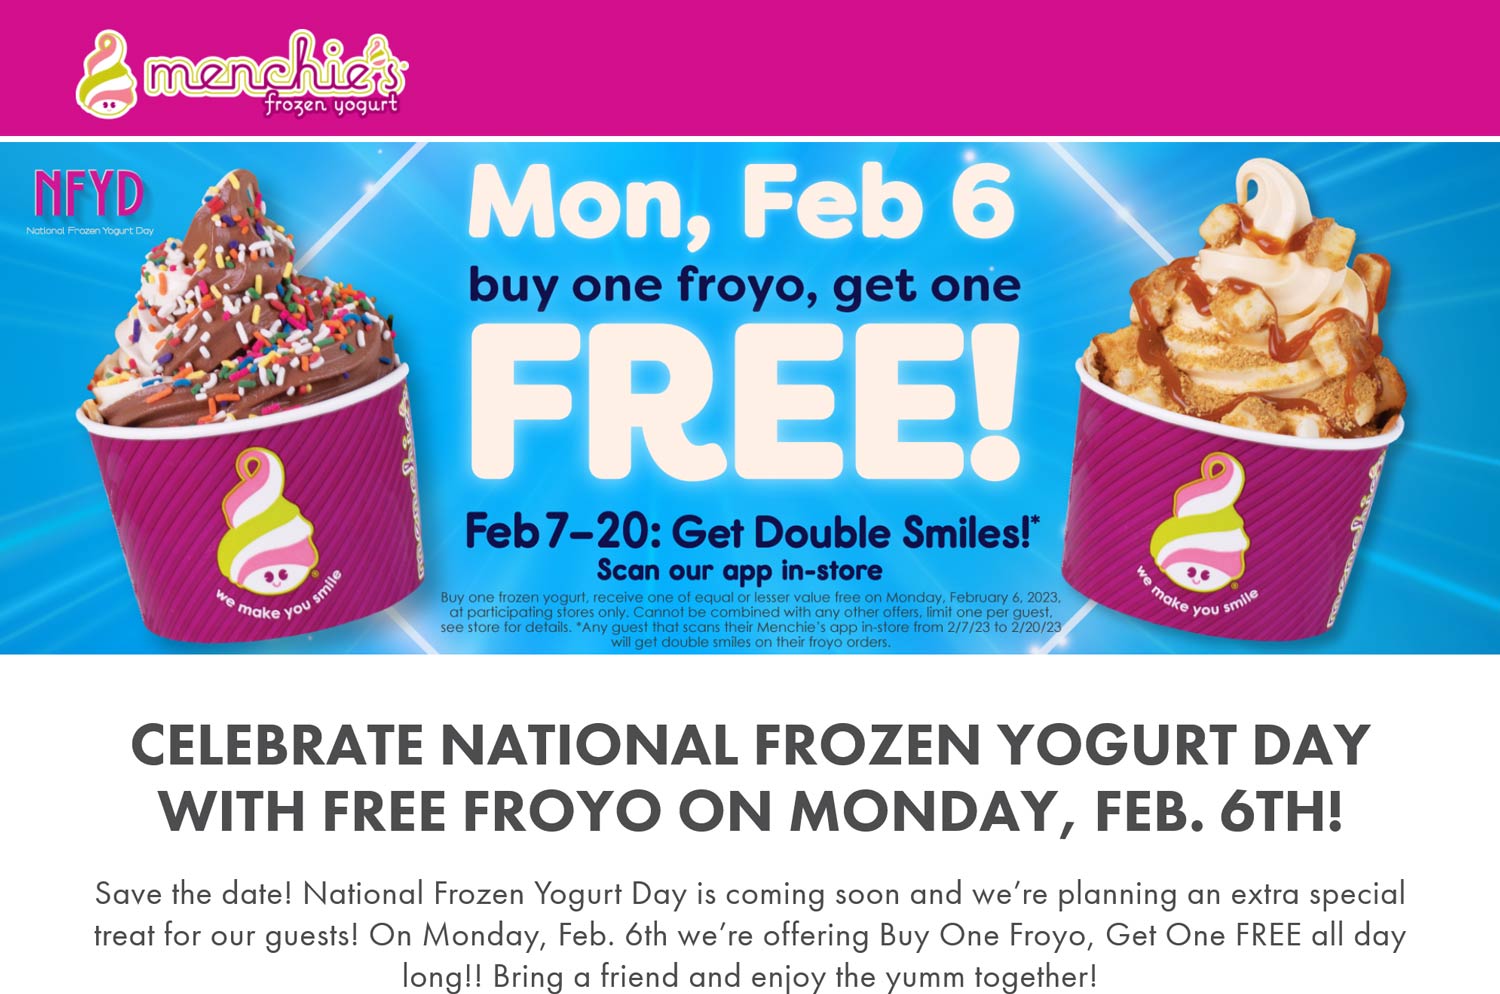 Menchies restaurants Coupon  Second frozen yogurt free the 6th at Menchies #menchies 